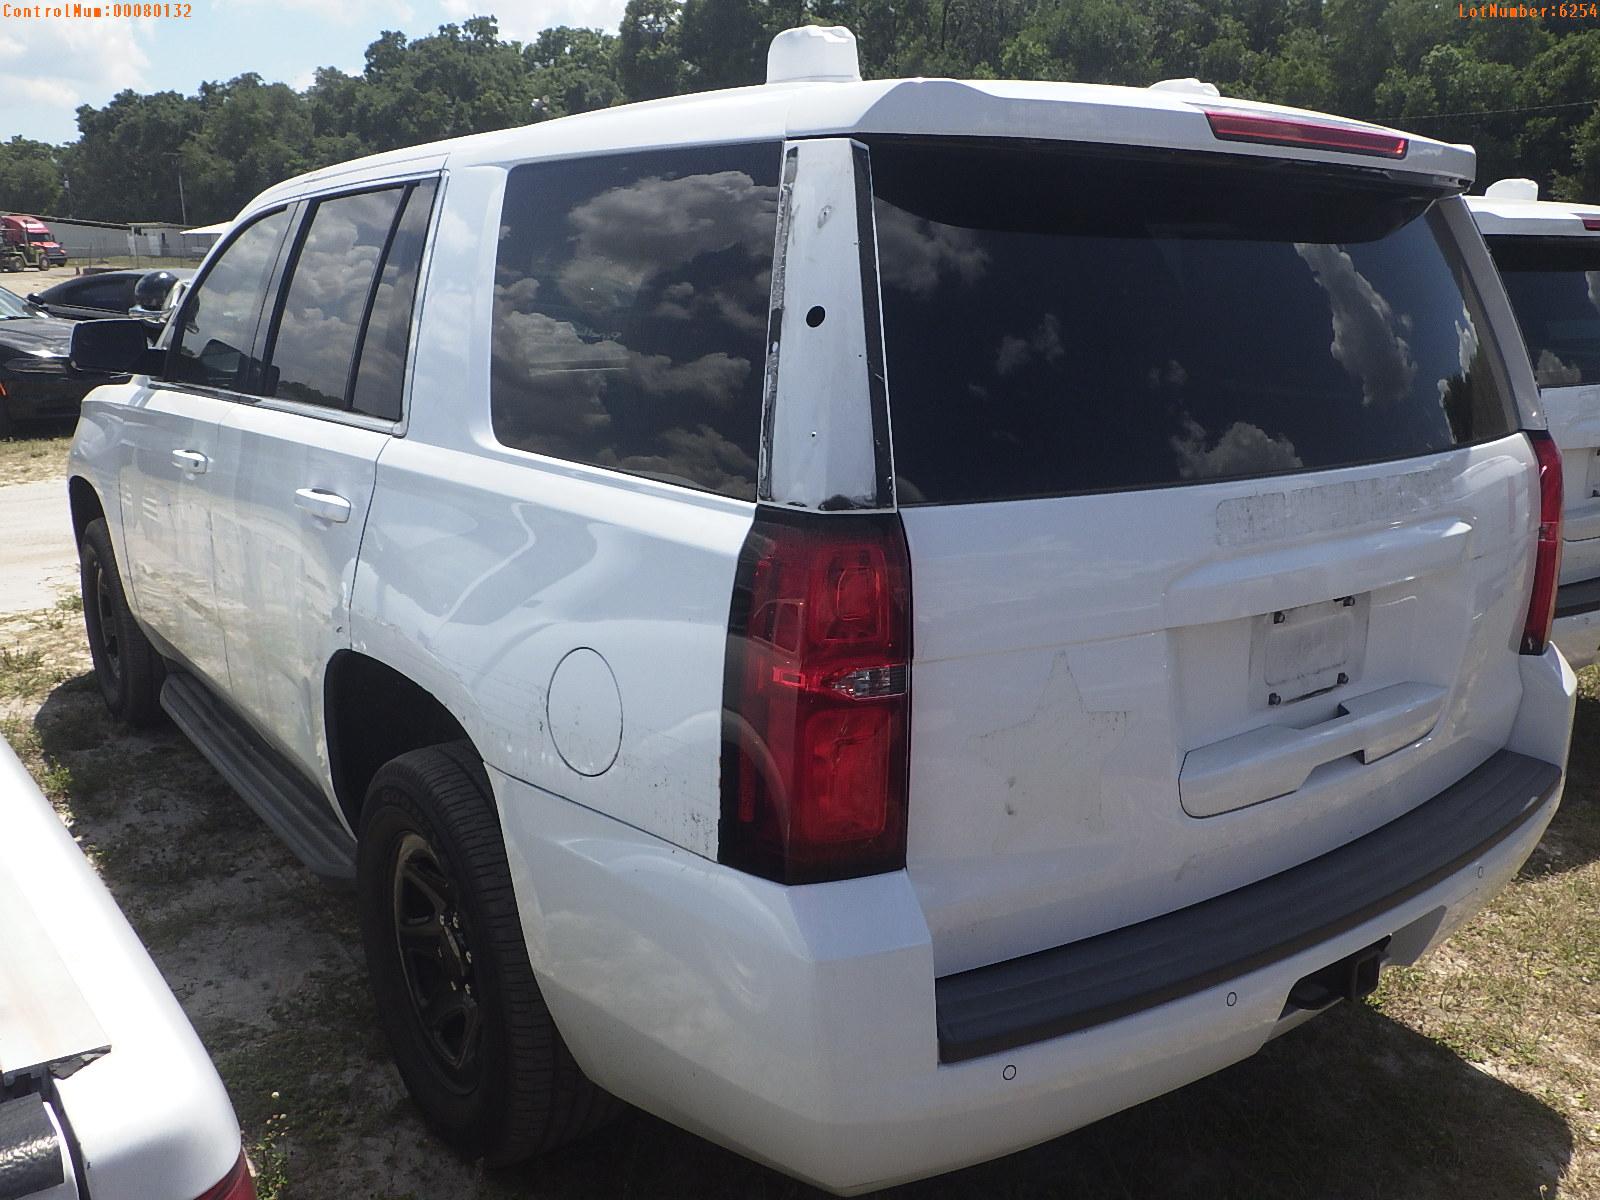 5-06254 (Cars-SUV 4D)  Seller: Gov-Pinellas County Sheriffs Ofc 2015 CHEV TAHOE